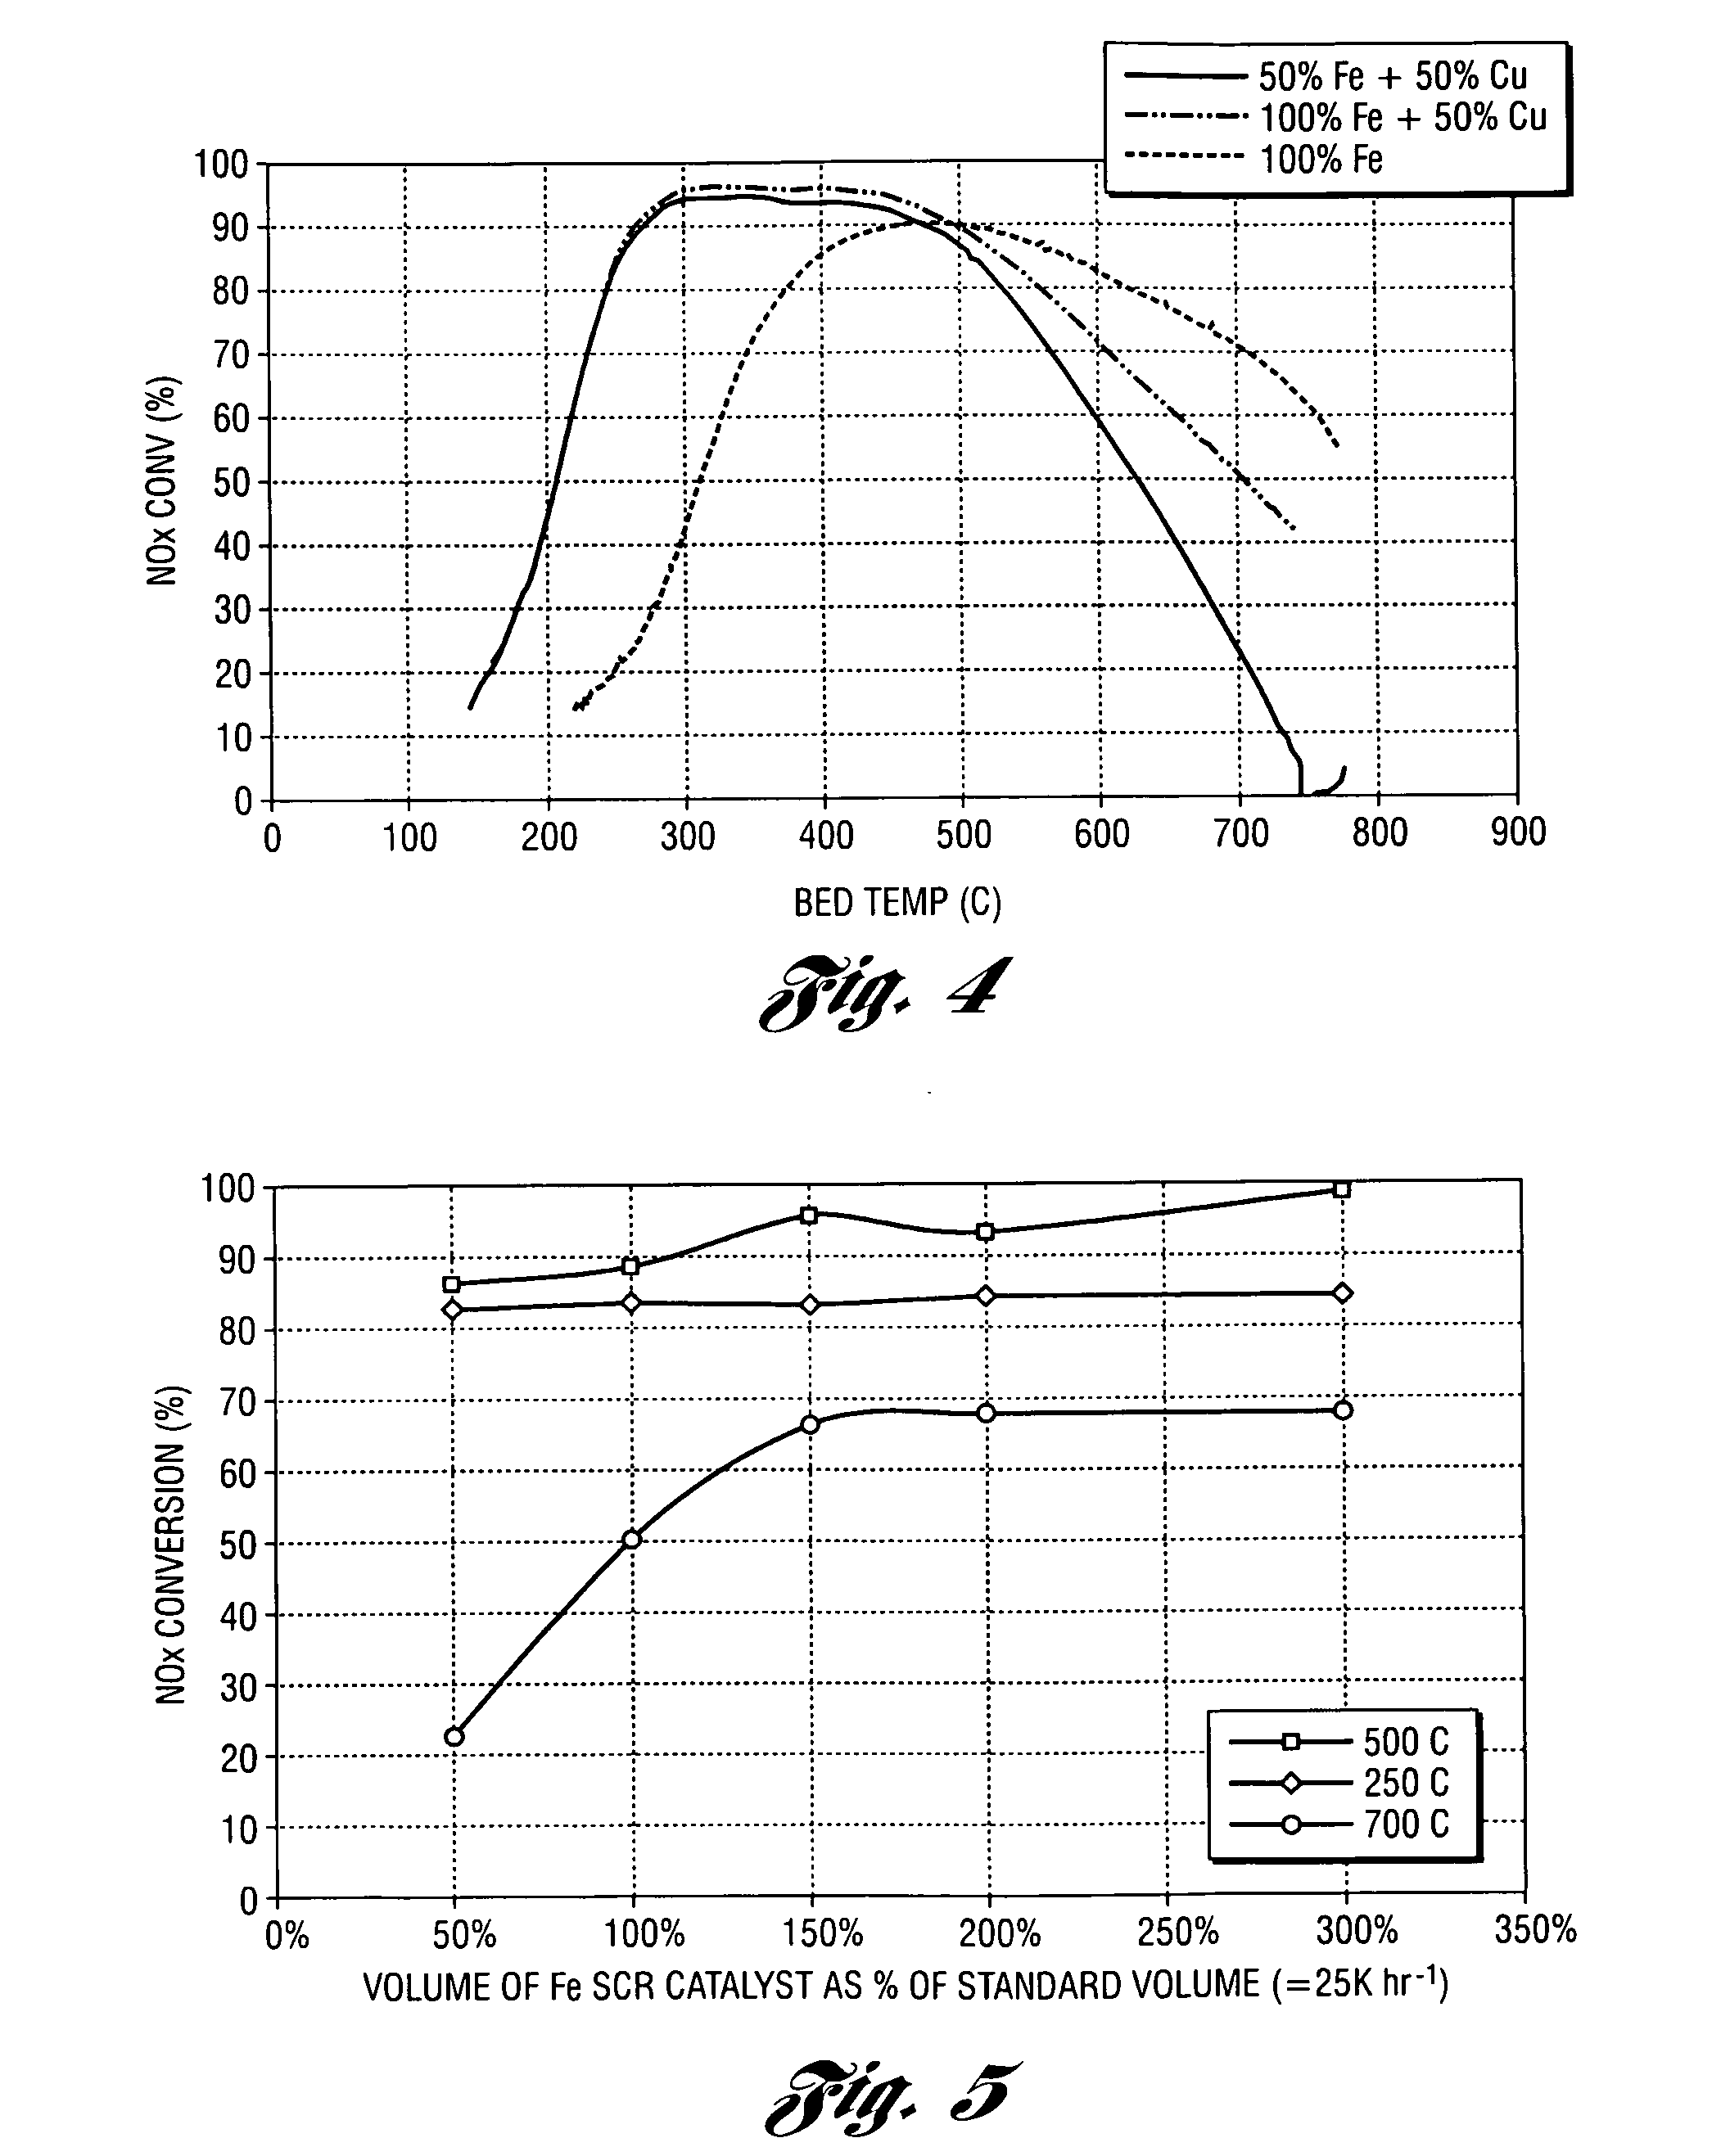 Selective catalytic reduction catalyst system with expanded temperature window